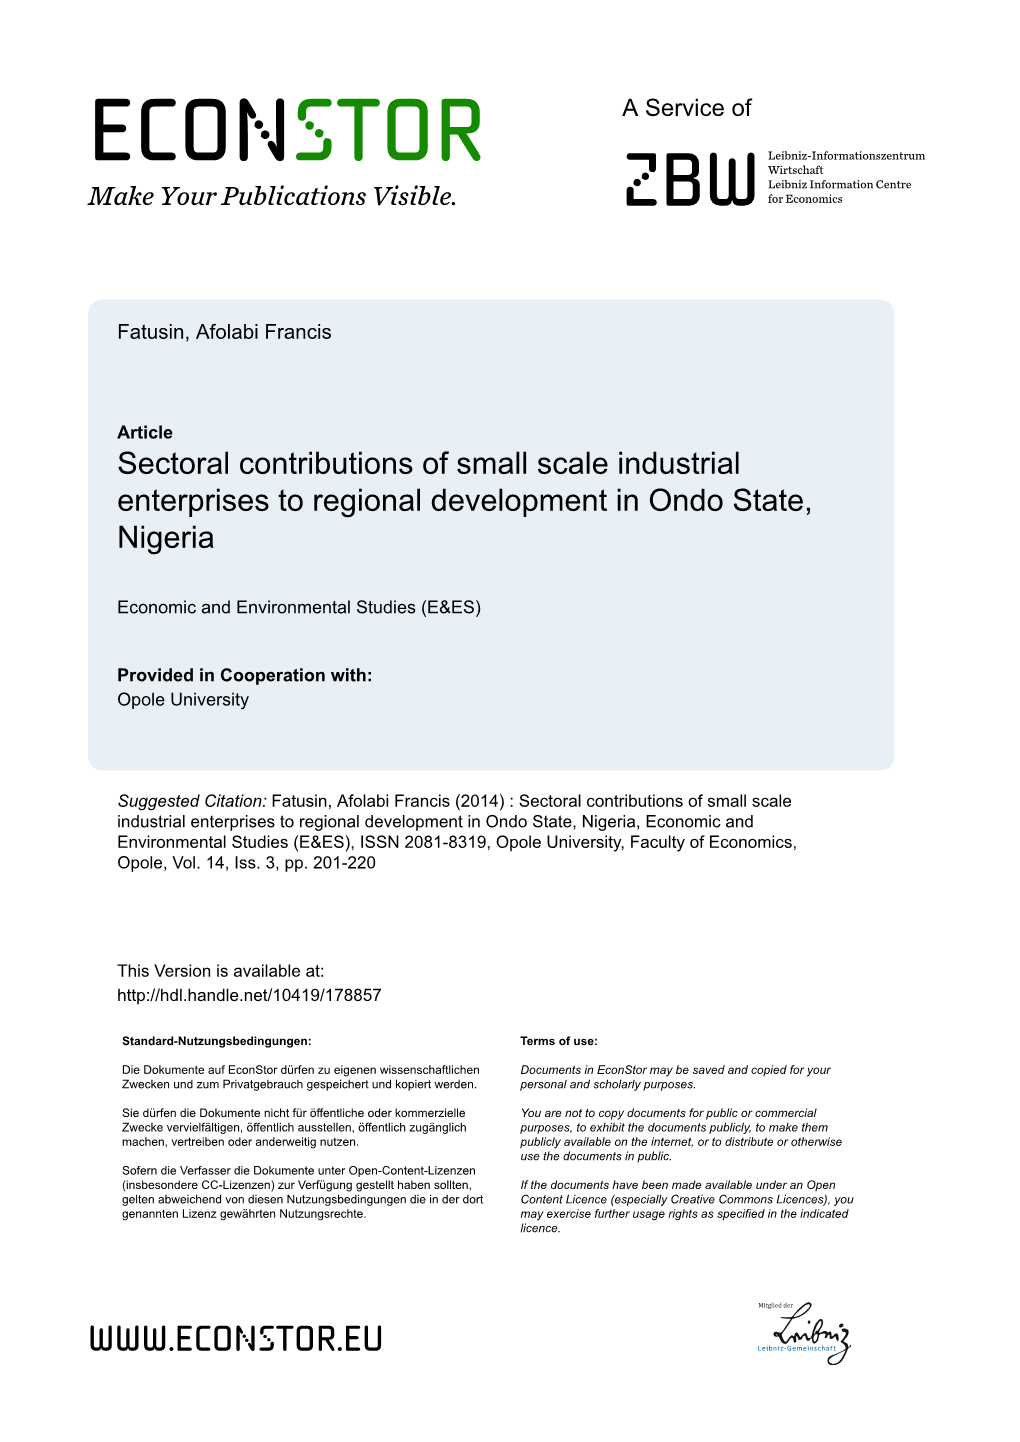 Sectoral Contributions of Small Scale Industrial Enterprises to Regional Development in Ondo State, Nigeria